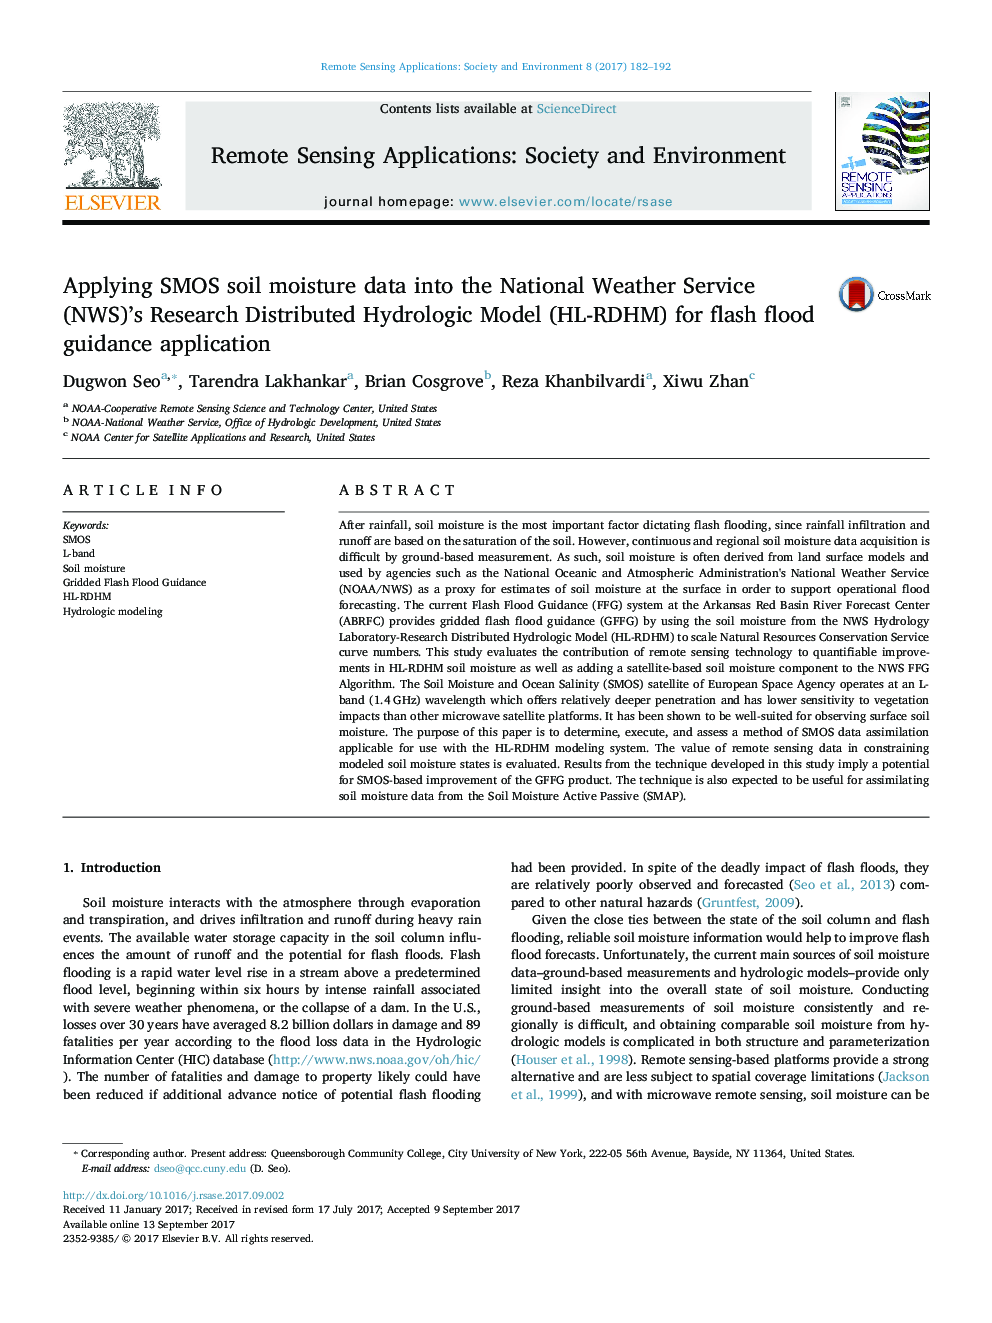 Applying SMOS soil moisture data into the National Weather Service (NWS)'s Research Distributed Hydrologic Model (HL-RDHM) for flash flood guidance application